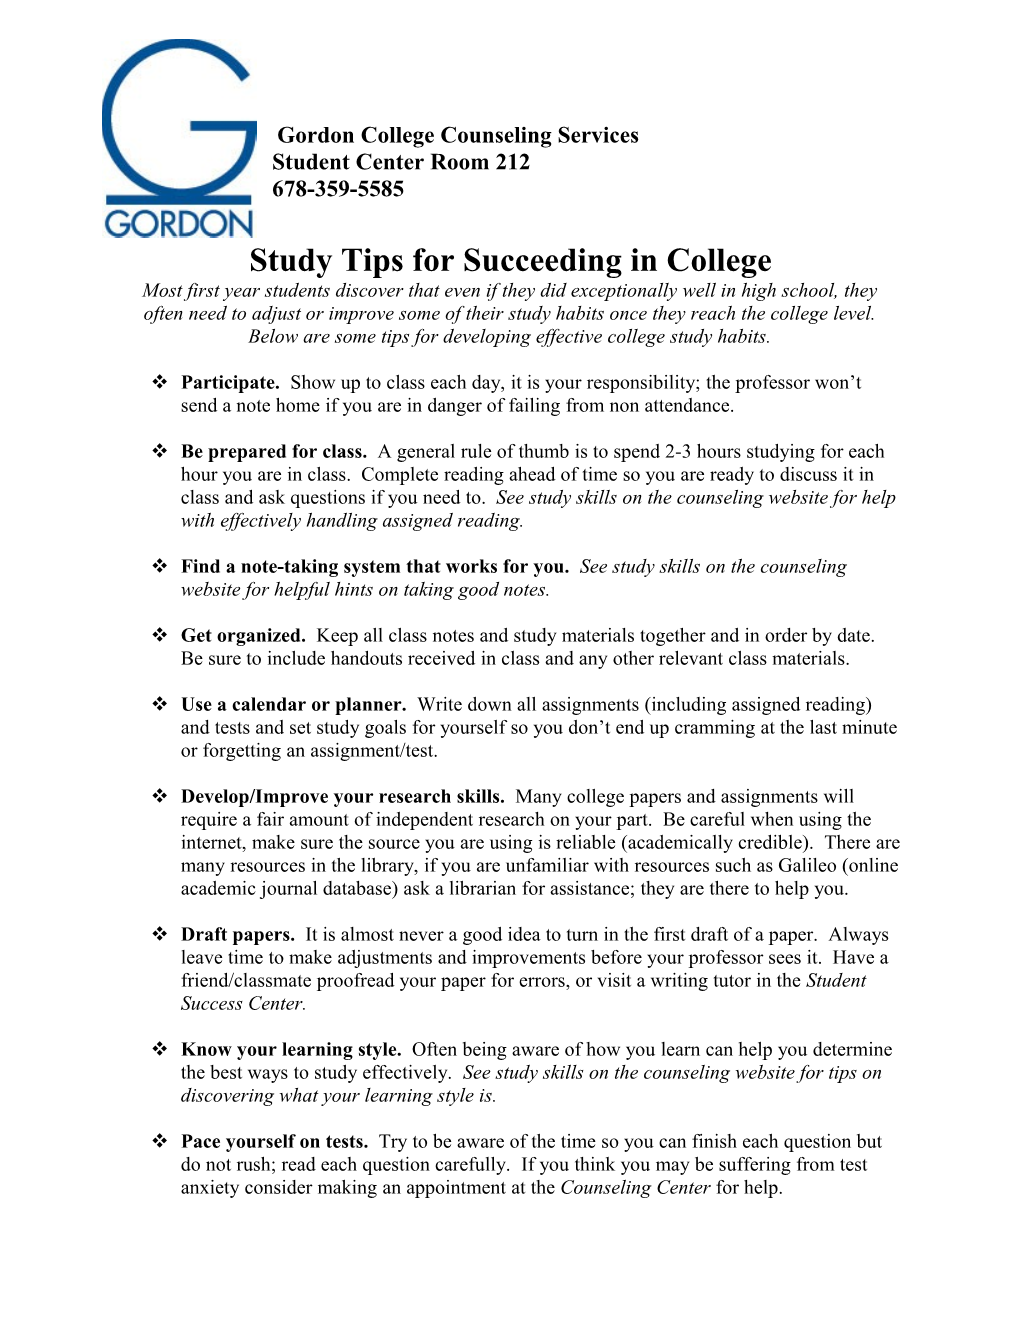 Study Tips for Succeeding in College